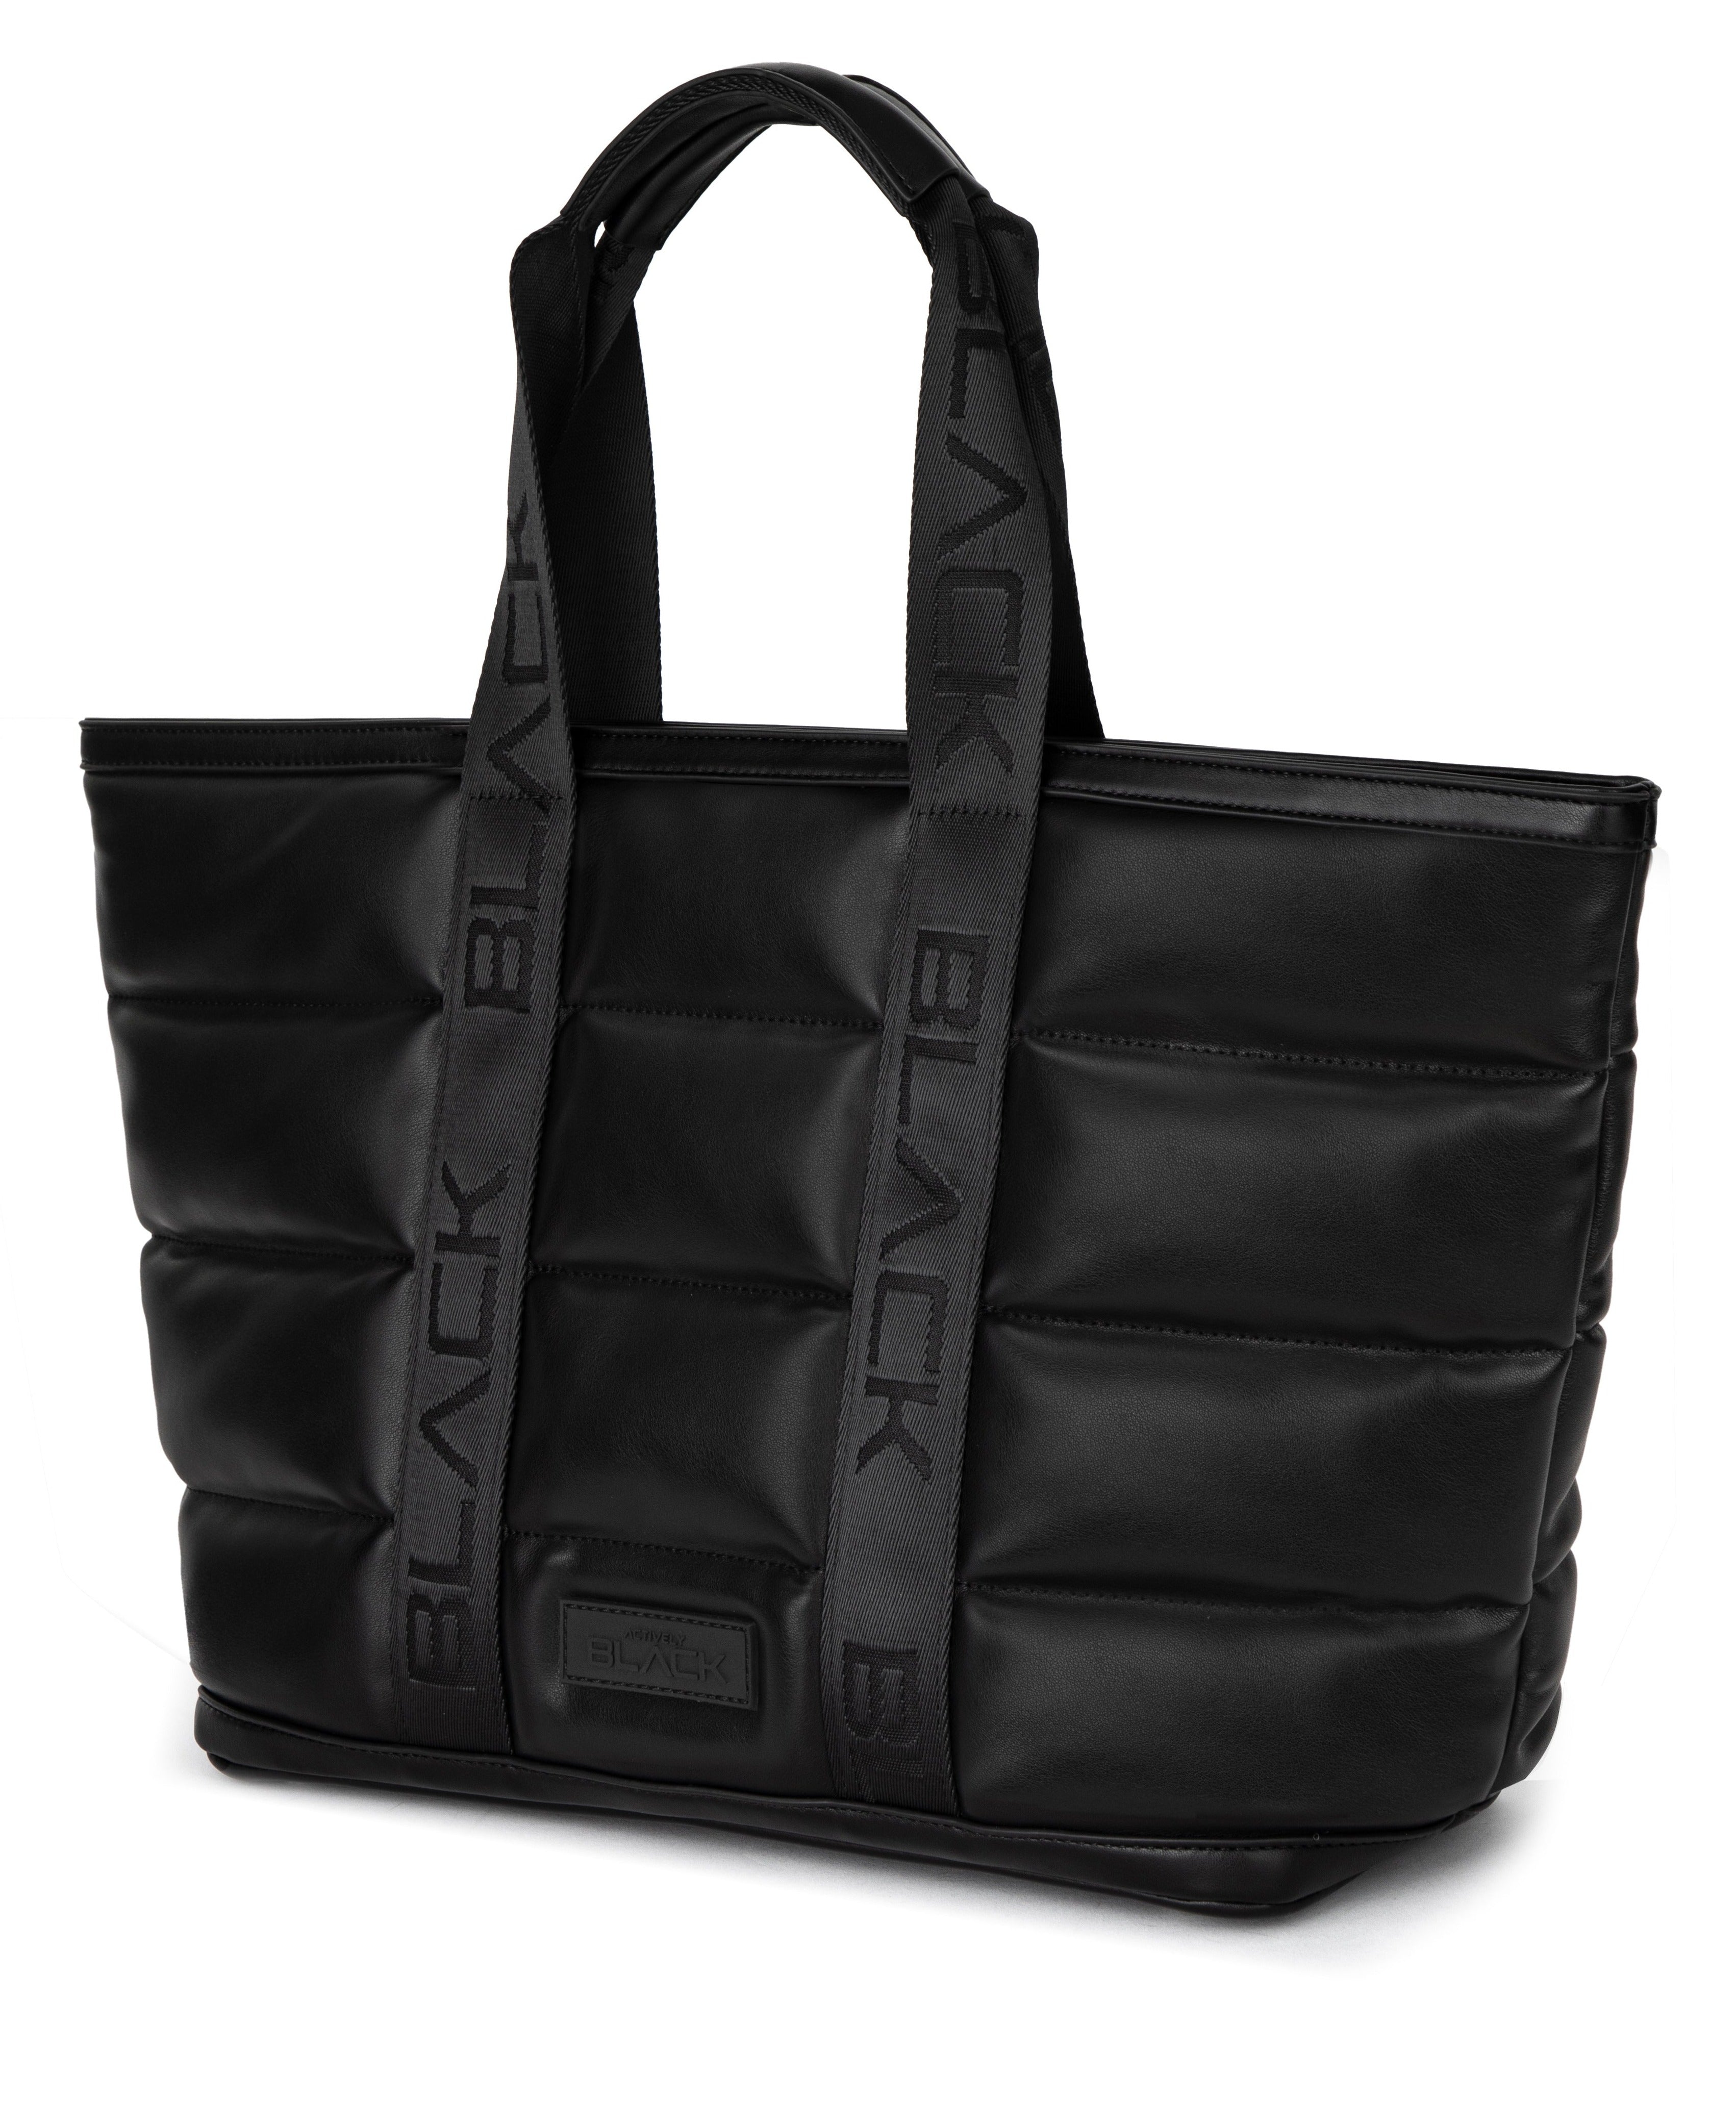 Black Band Luxe Tote